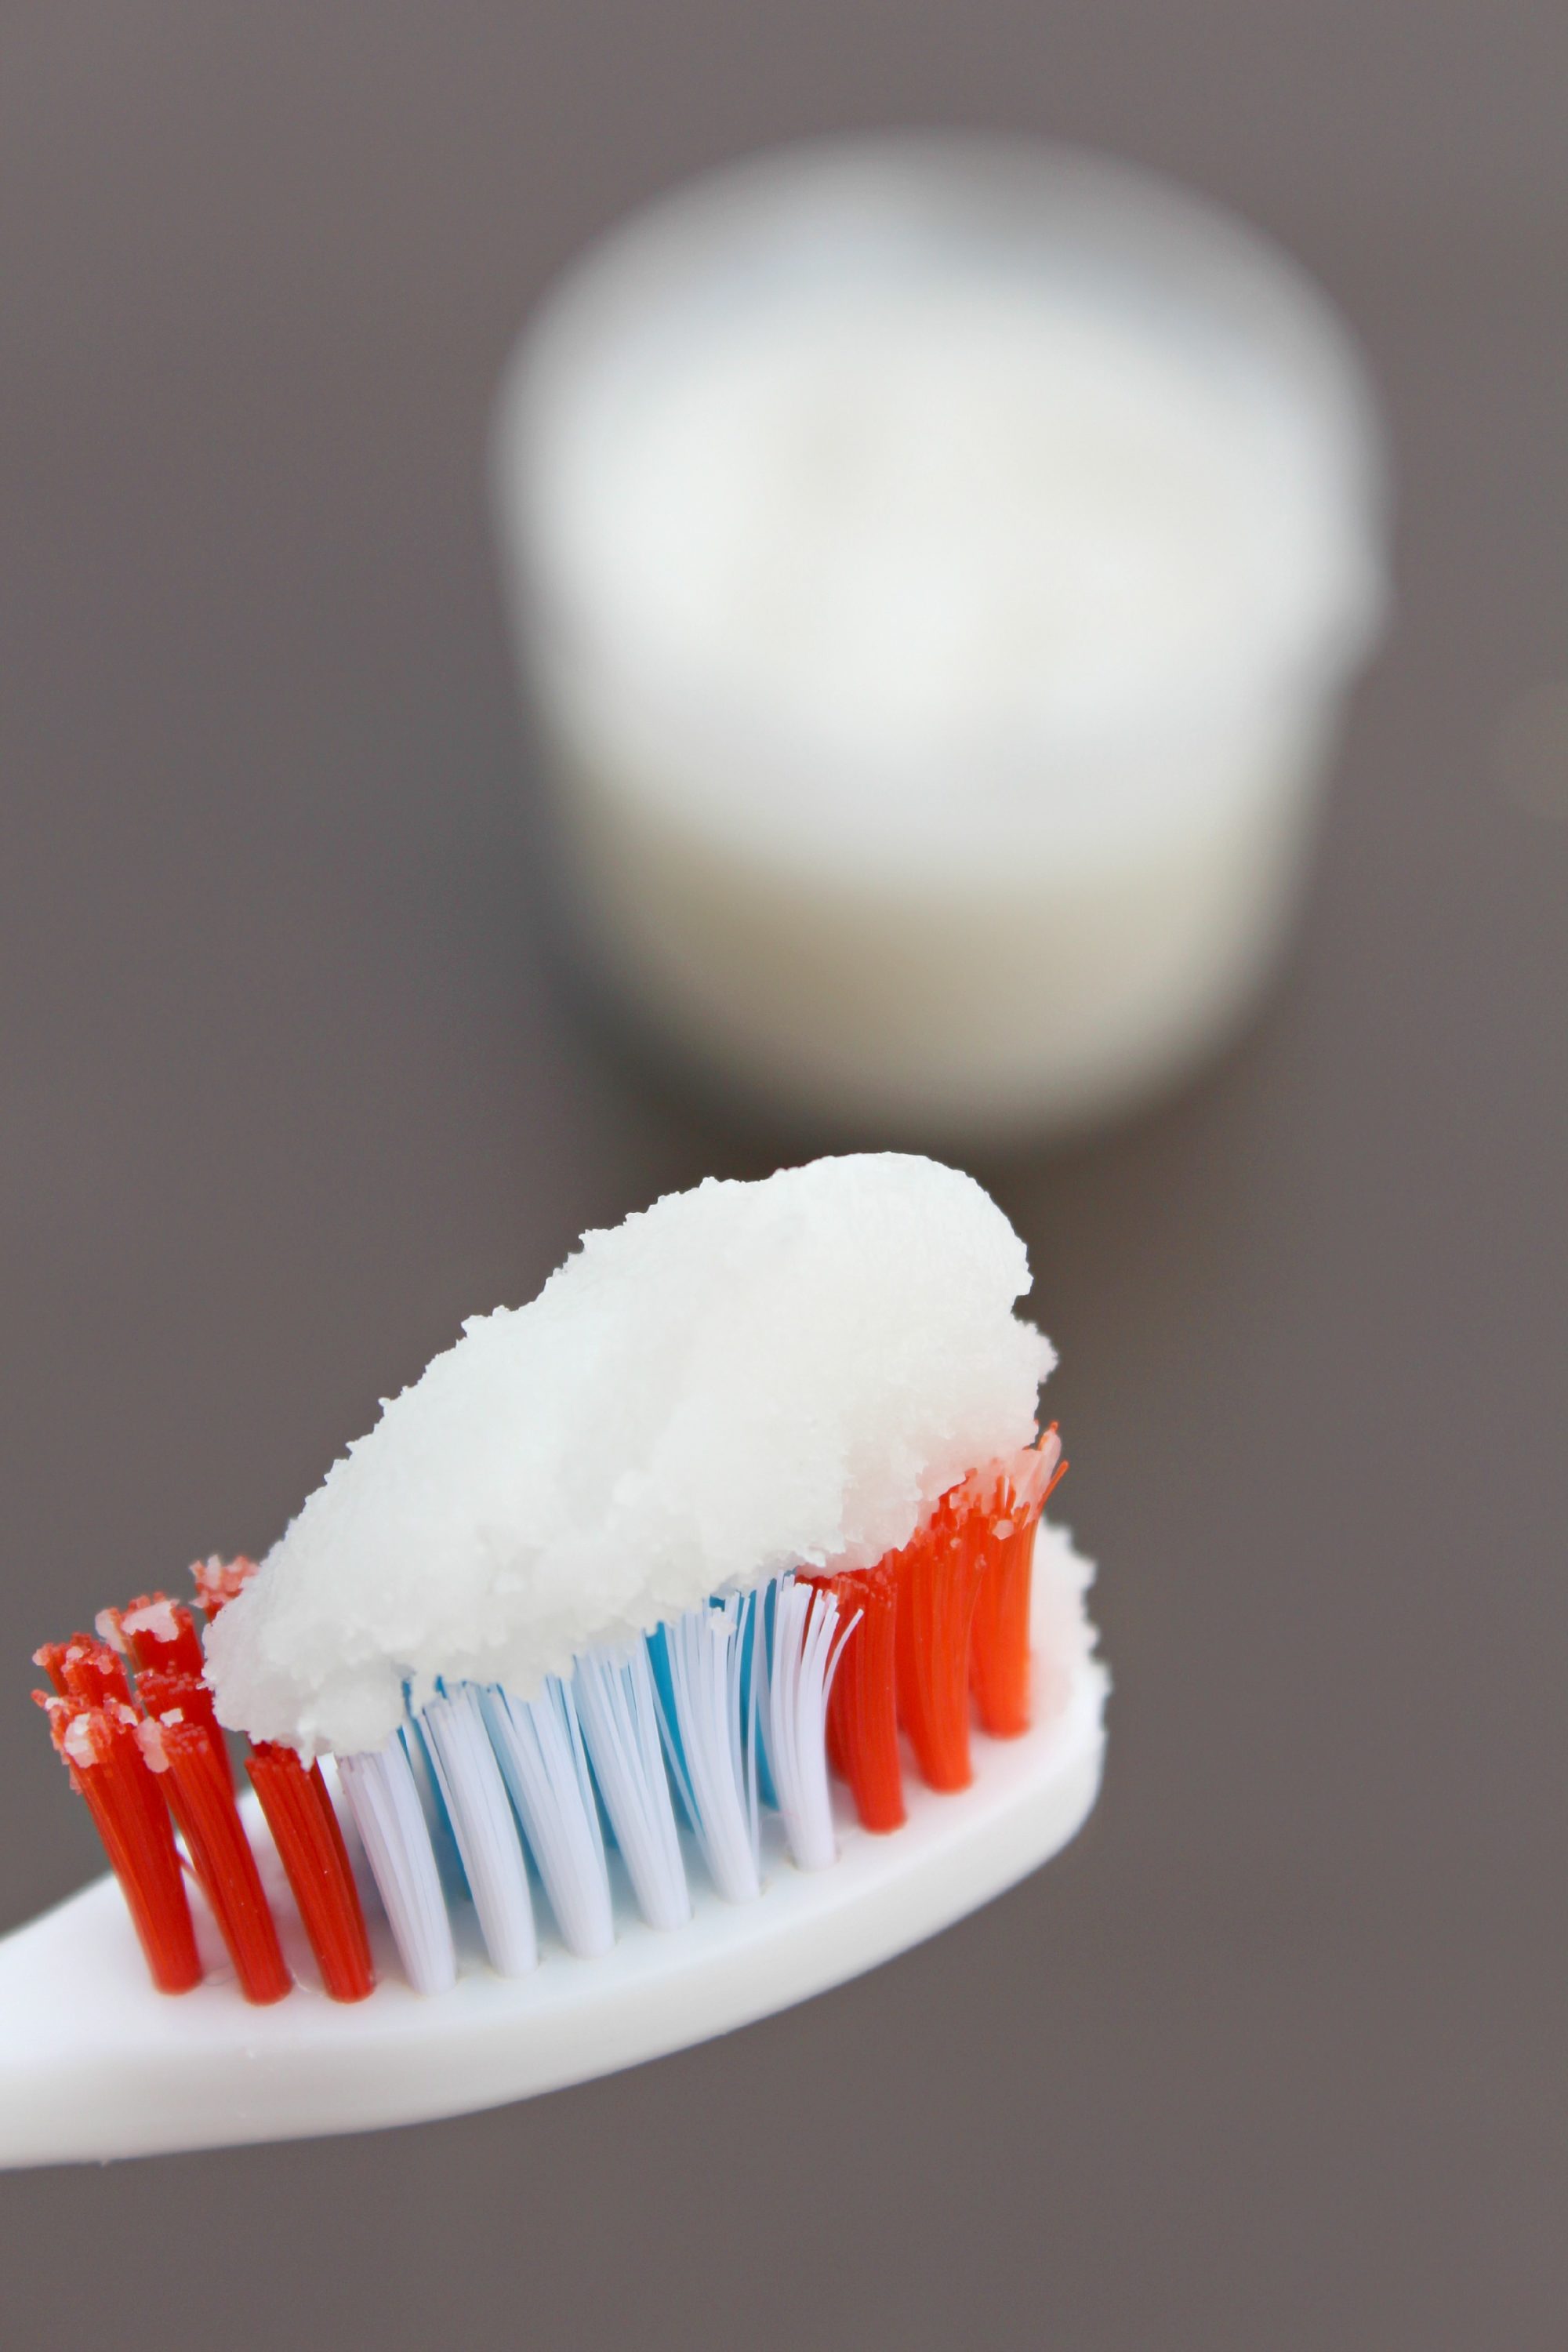 This homemade coconut oil toothpaste recipe is simple and fun to prepare and also much safer and healthier for your teeth.